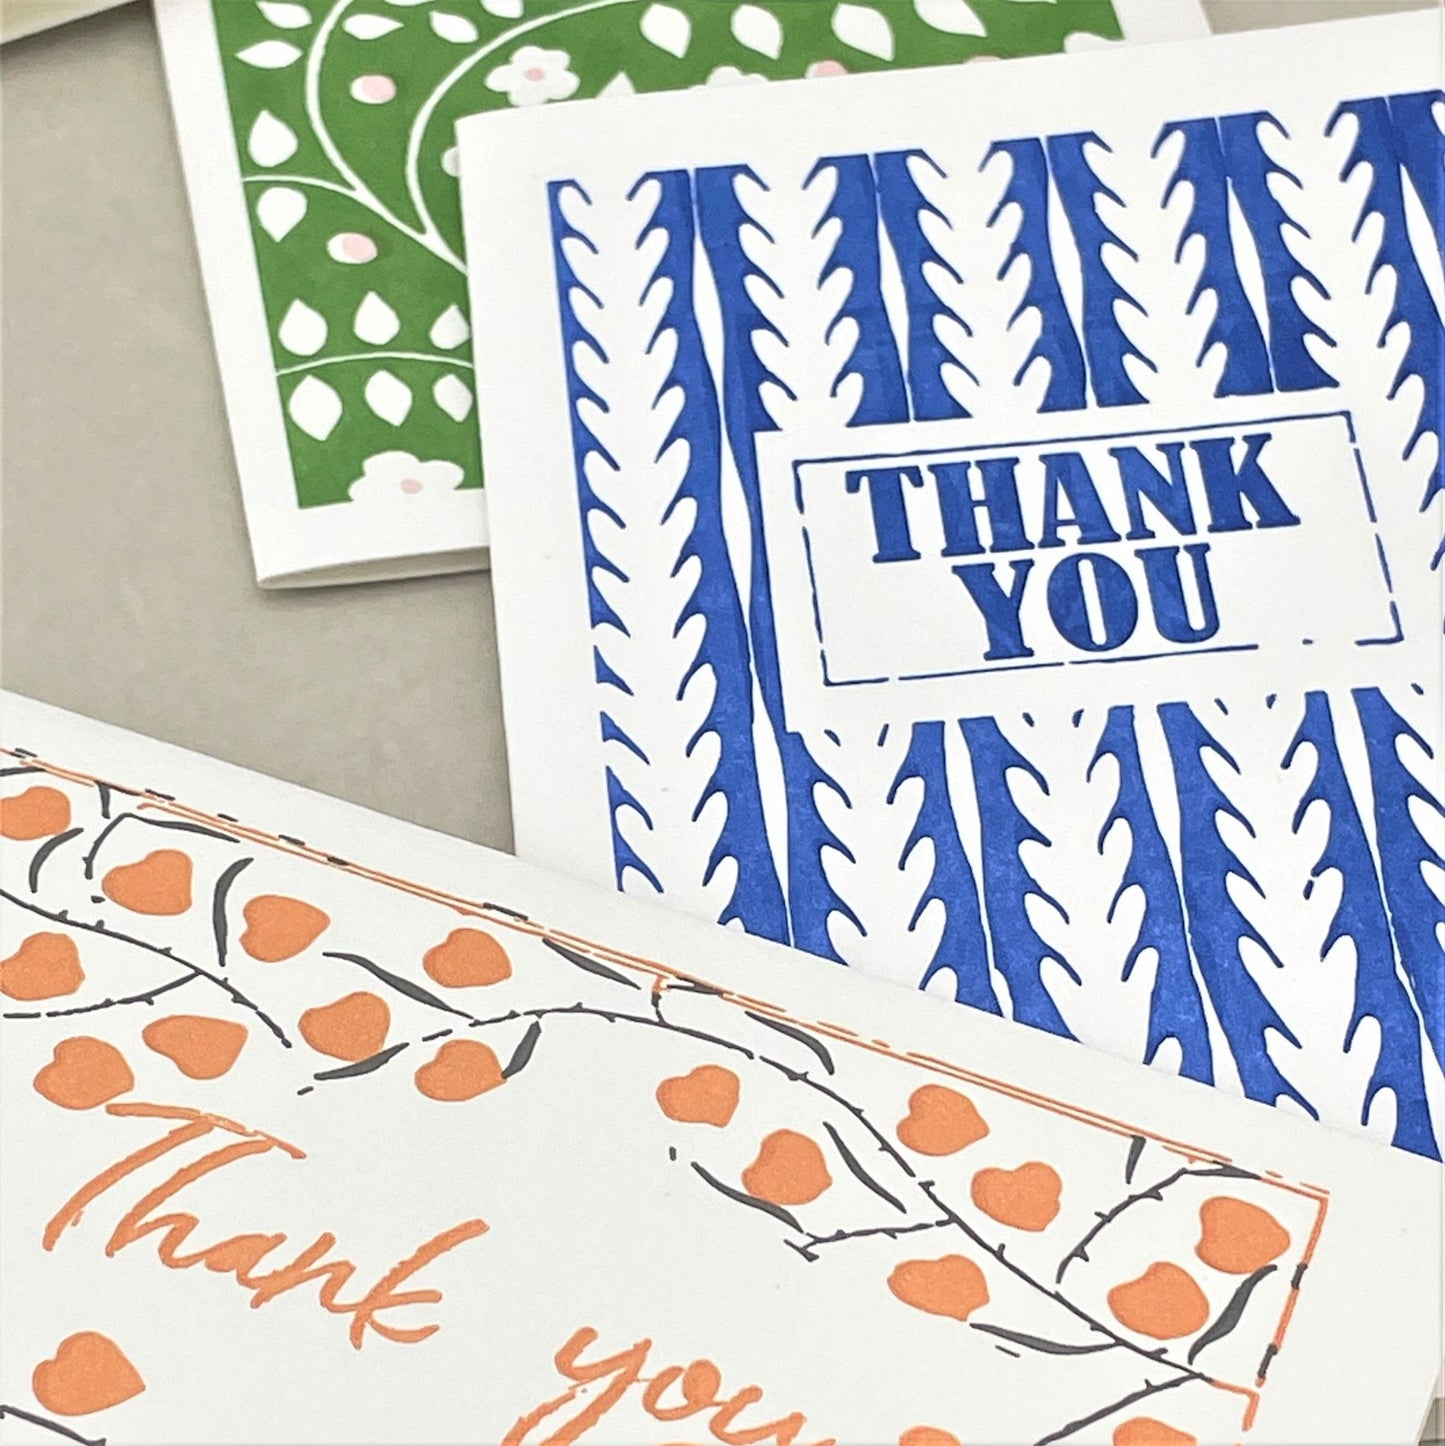 small greetings card, orange leaves and thank you messages, shown alongside a blue thank you card